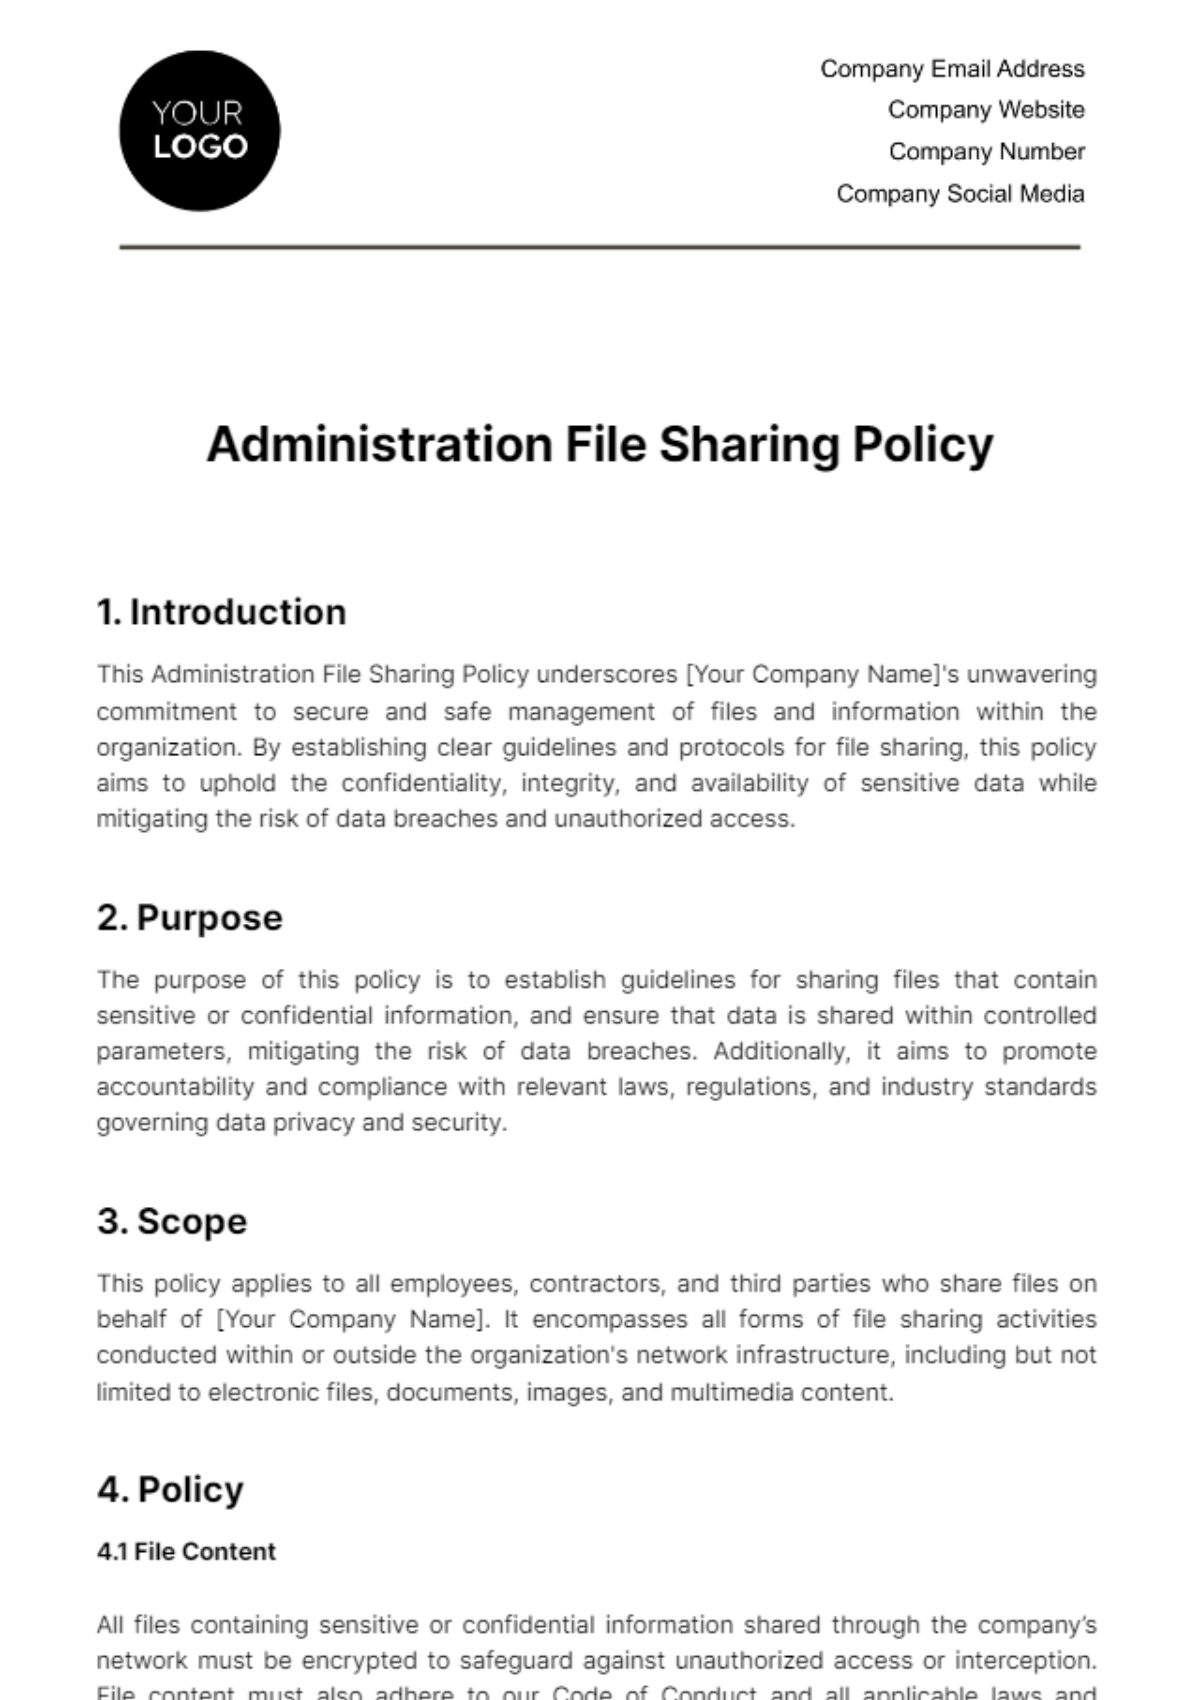 Free Administration File Sharing Policy Template